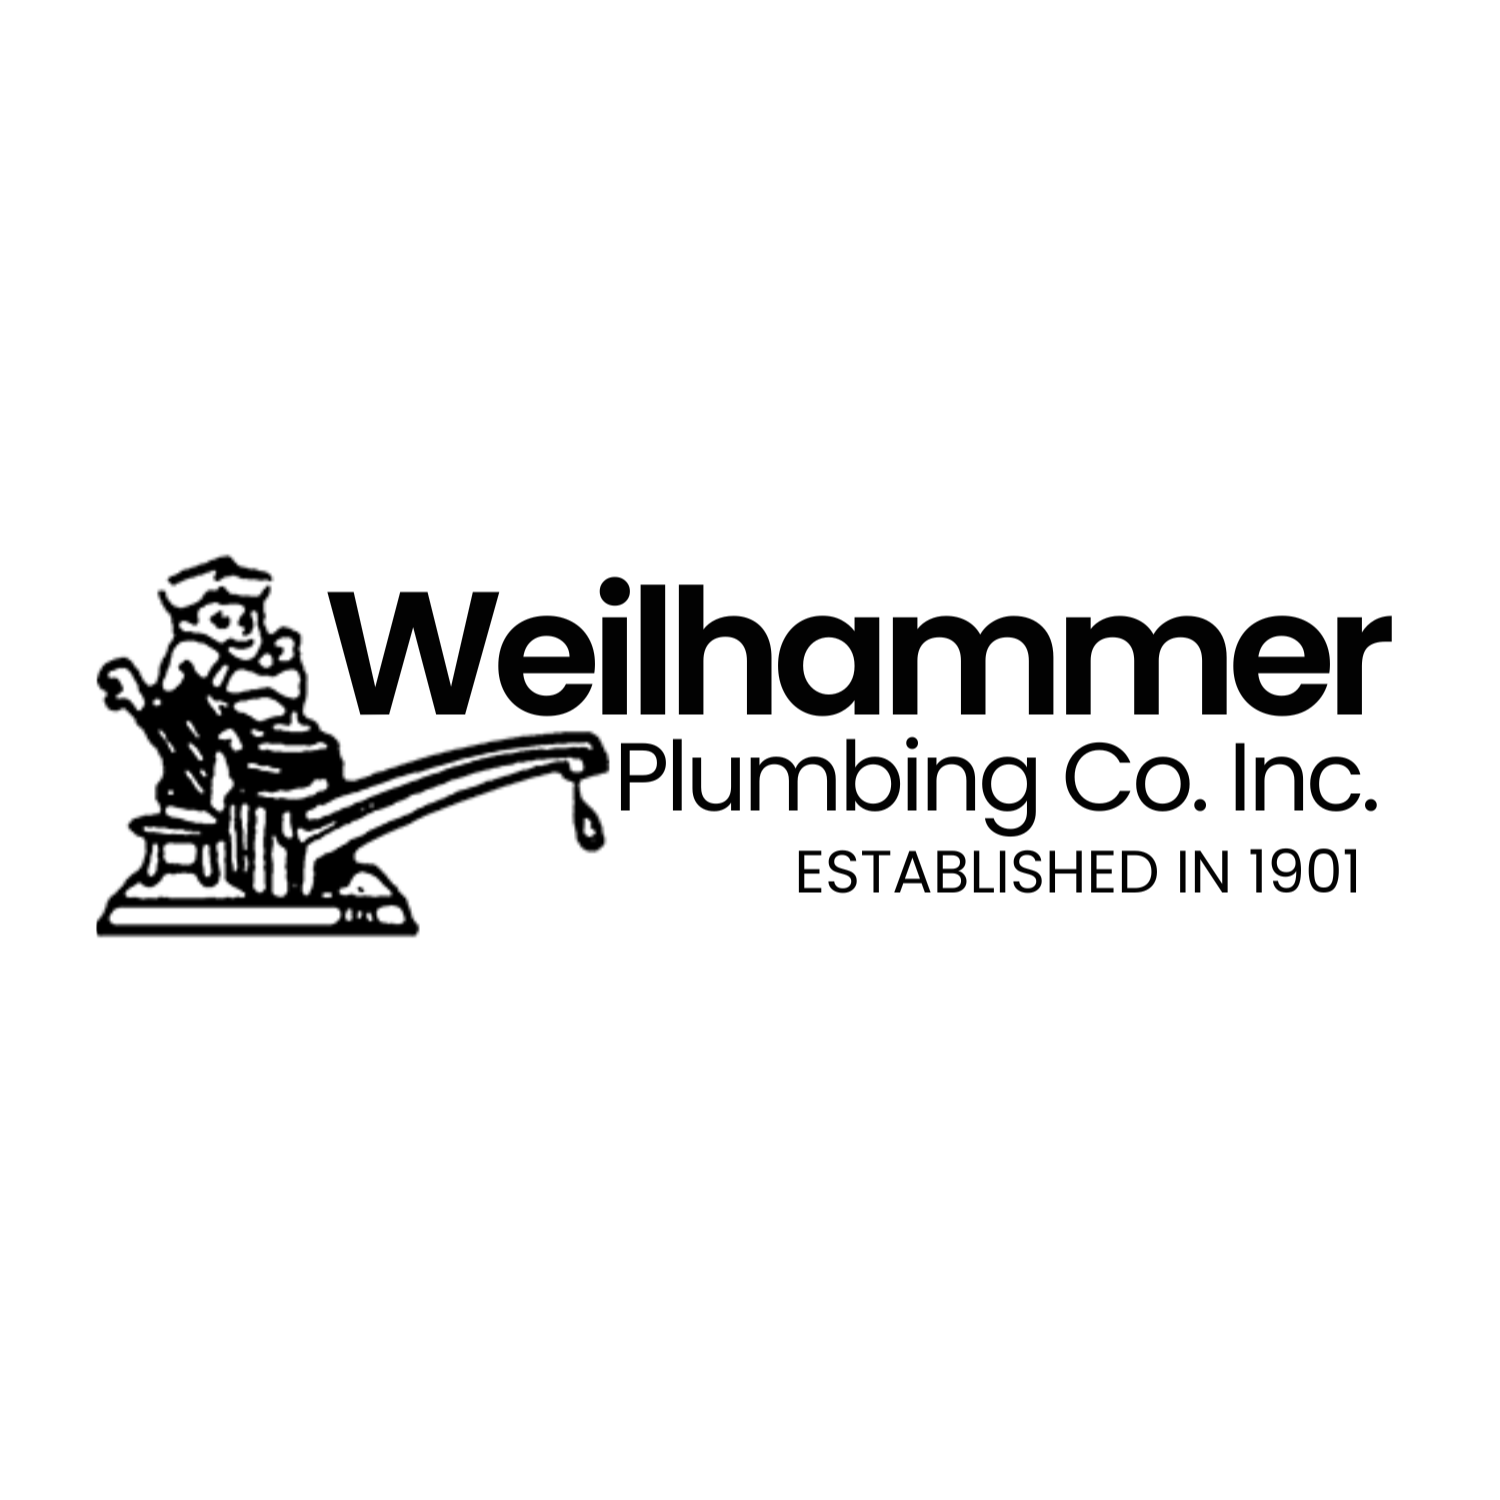 Weilhammer Plumbing Inc - Indianapolis, IN - (317)714-0759 | ShowMeLocal.com